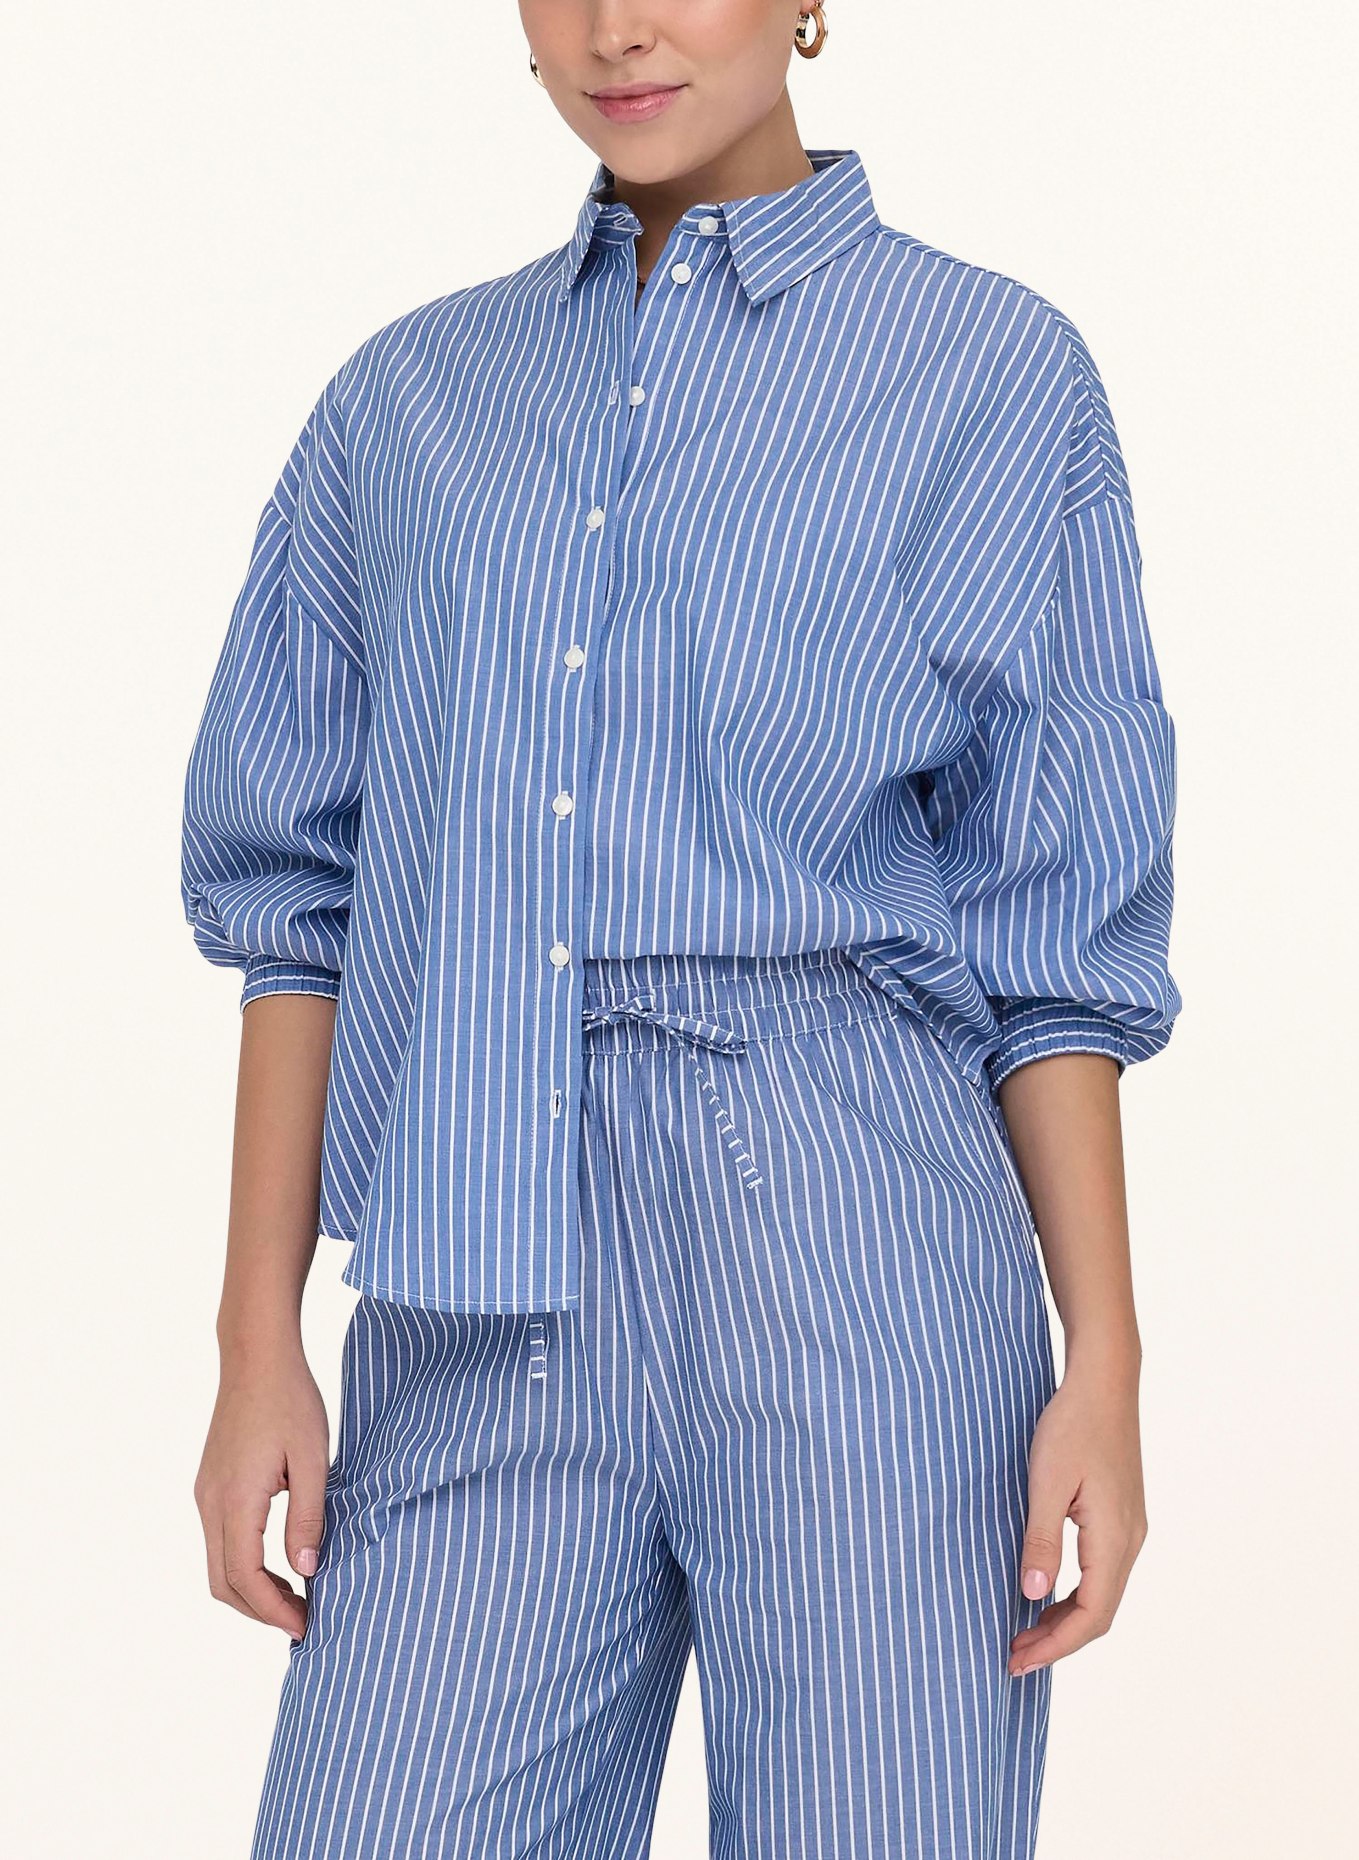 ONLY Shirt blouse, Color: BLUE/ WHITE (Image 2)